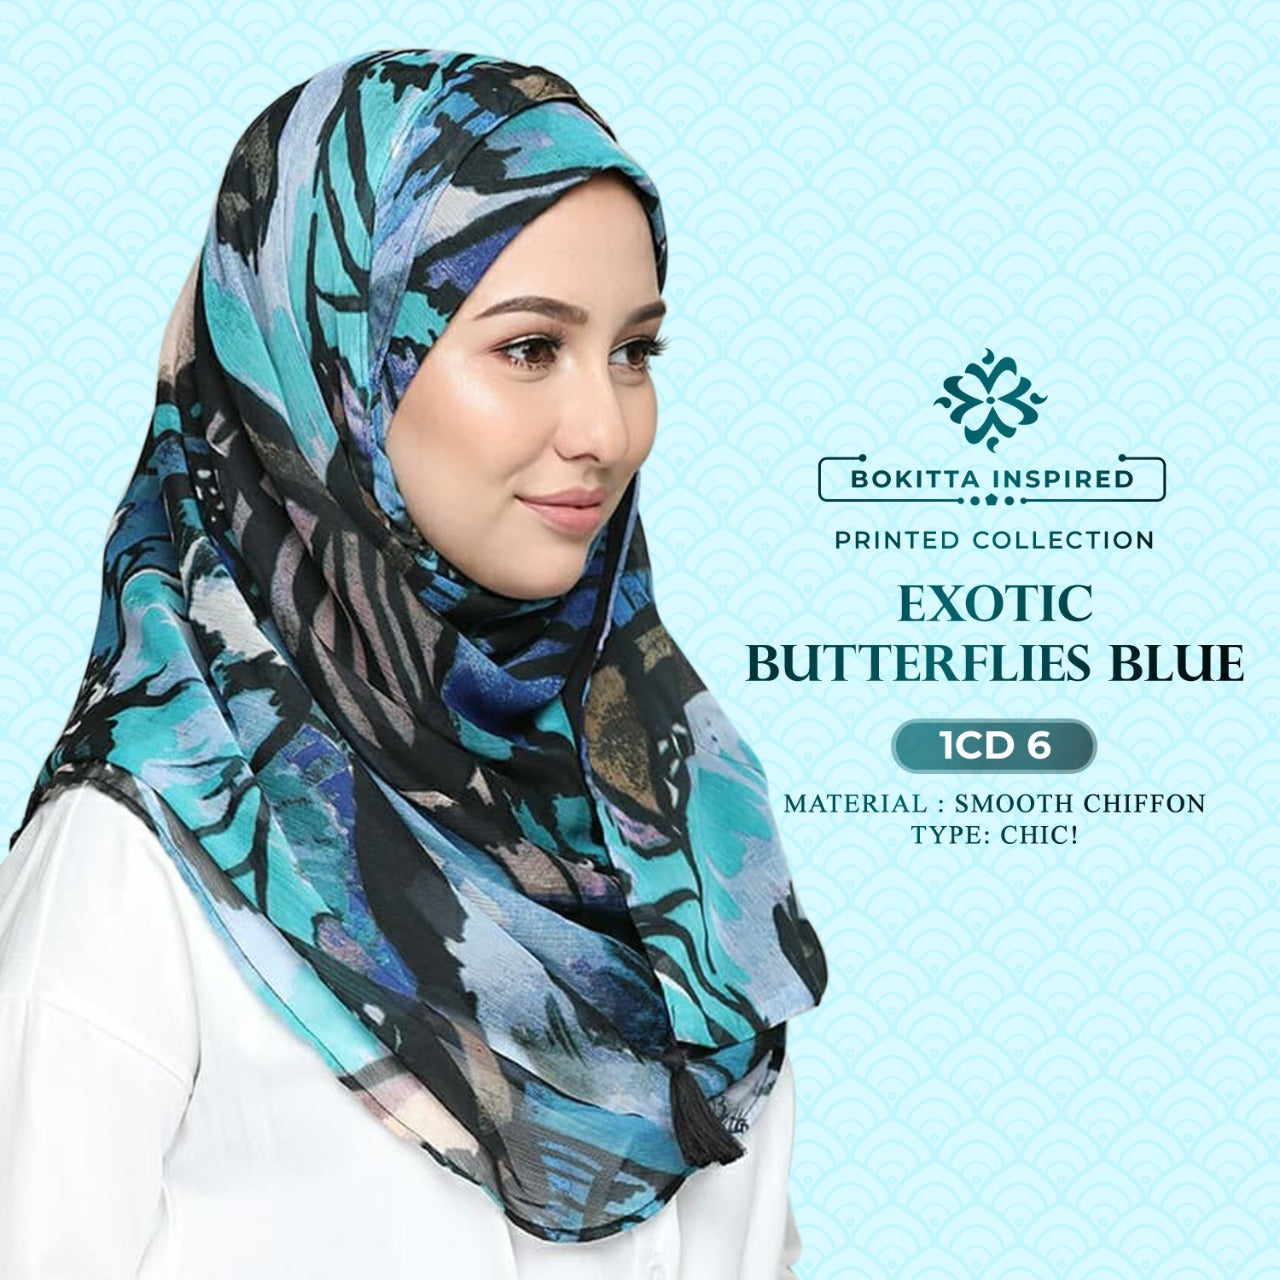 Bokitta Chic! Printed Best Seller Collection RM19